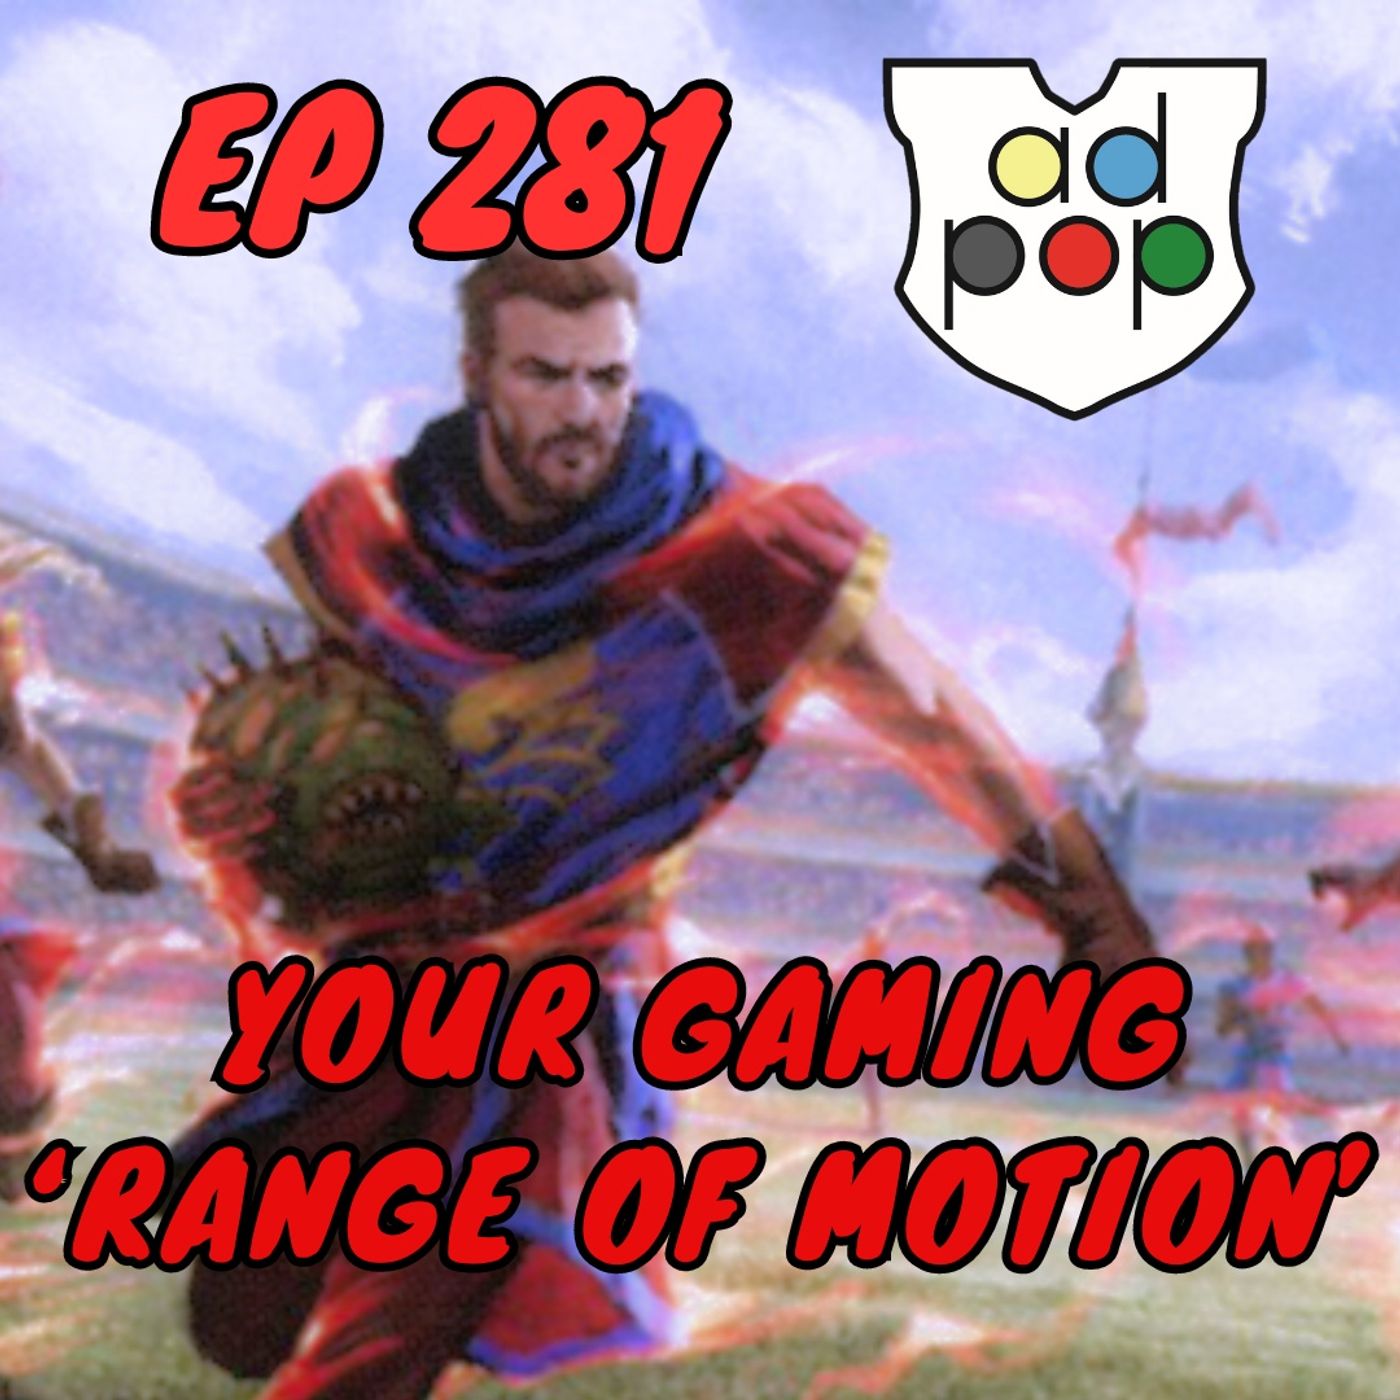 Commander ad Populum, Ep 281 - Your Gaming 'Range of Motion'